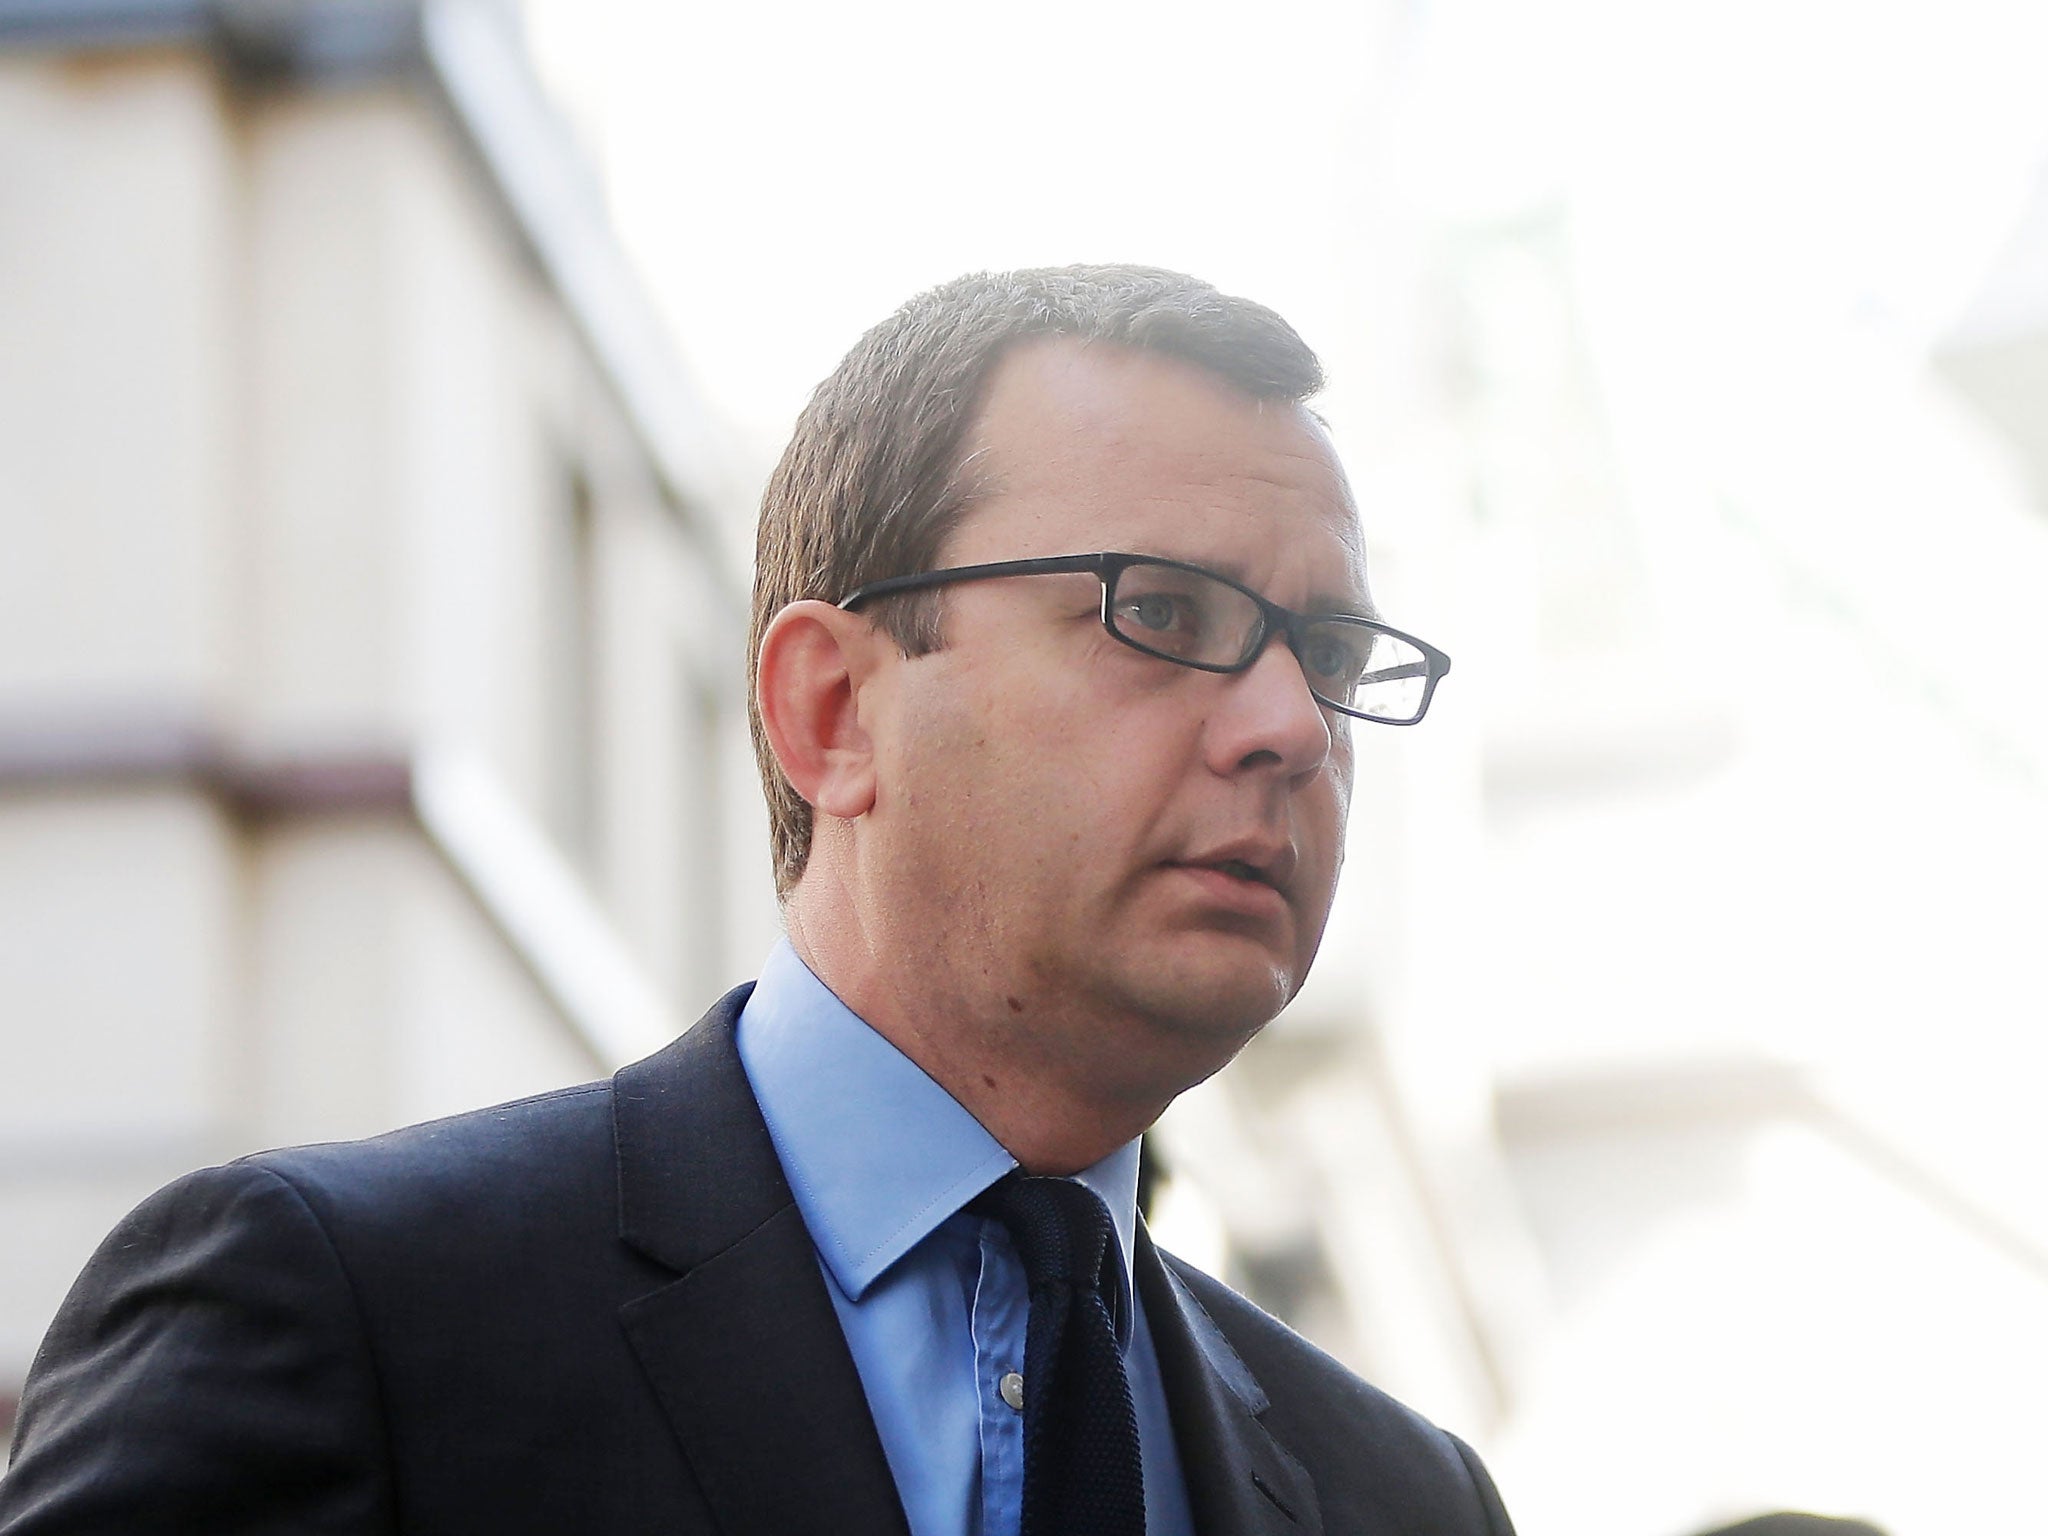 Former government Director of Communications and News of The World editor Andy Coulson